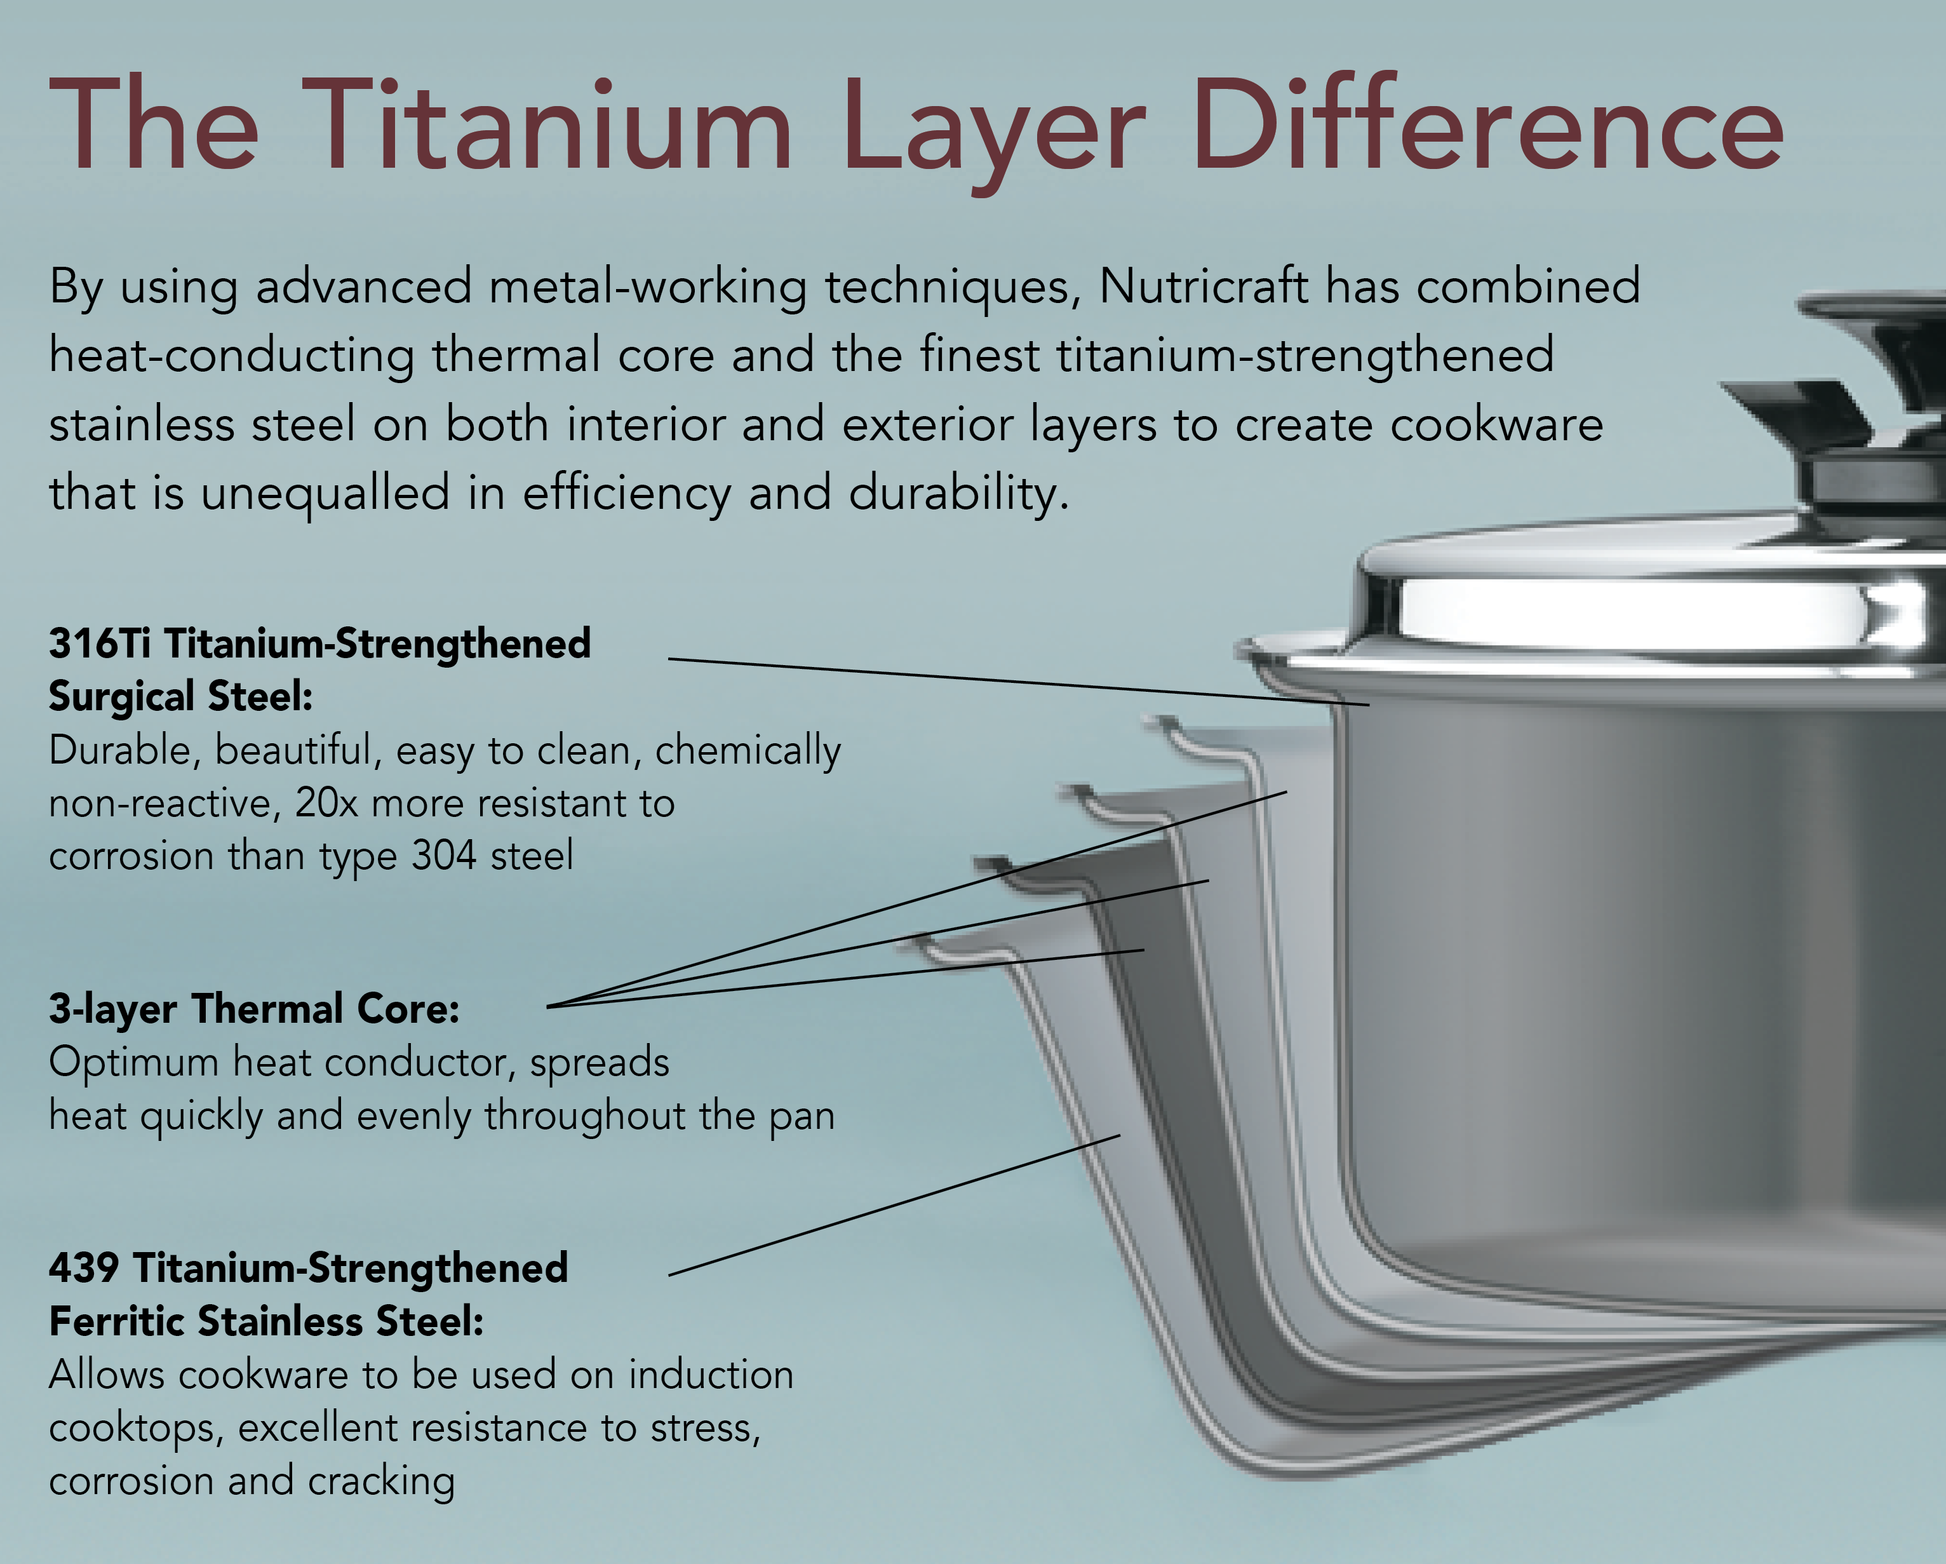 The Titanium Layer Difference